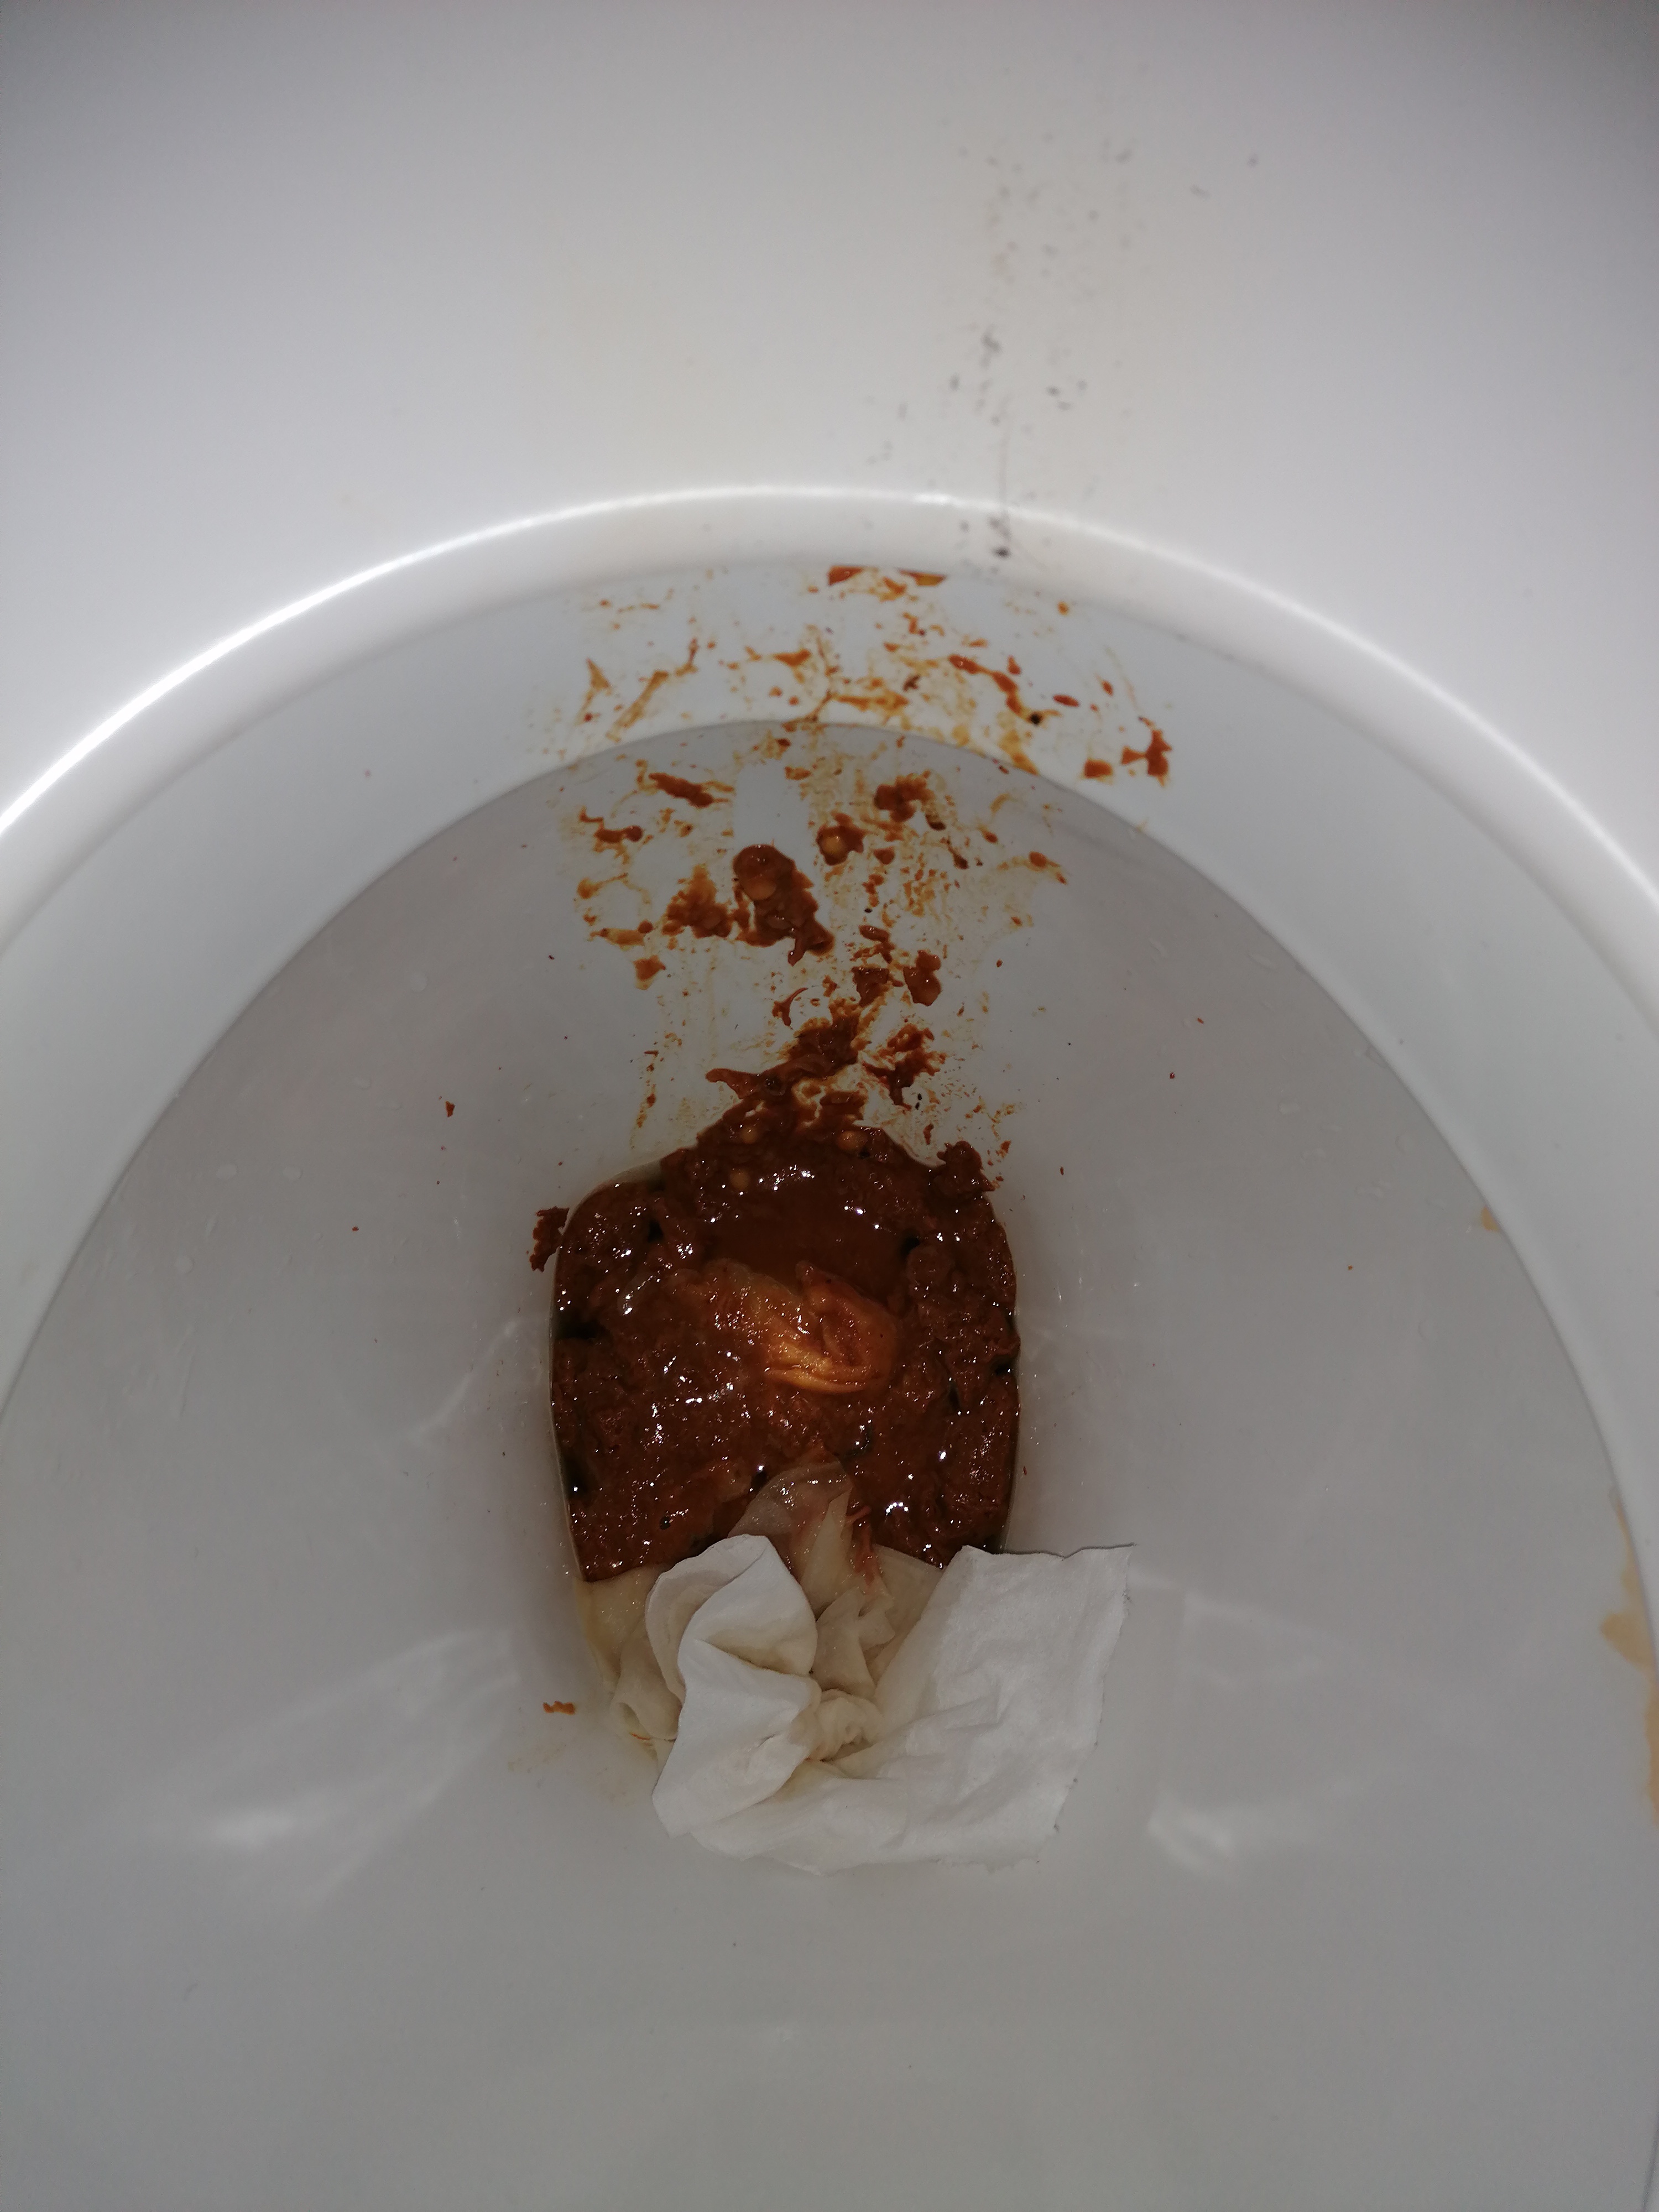 Early morning wet shit on mates loo